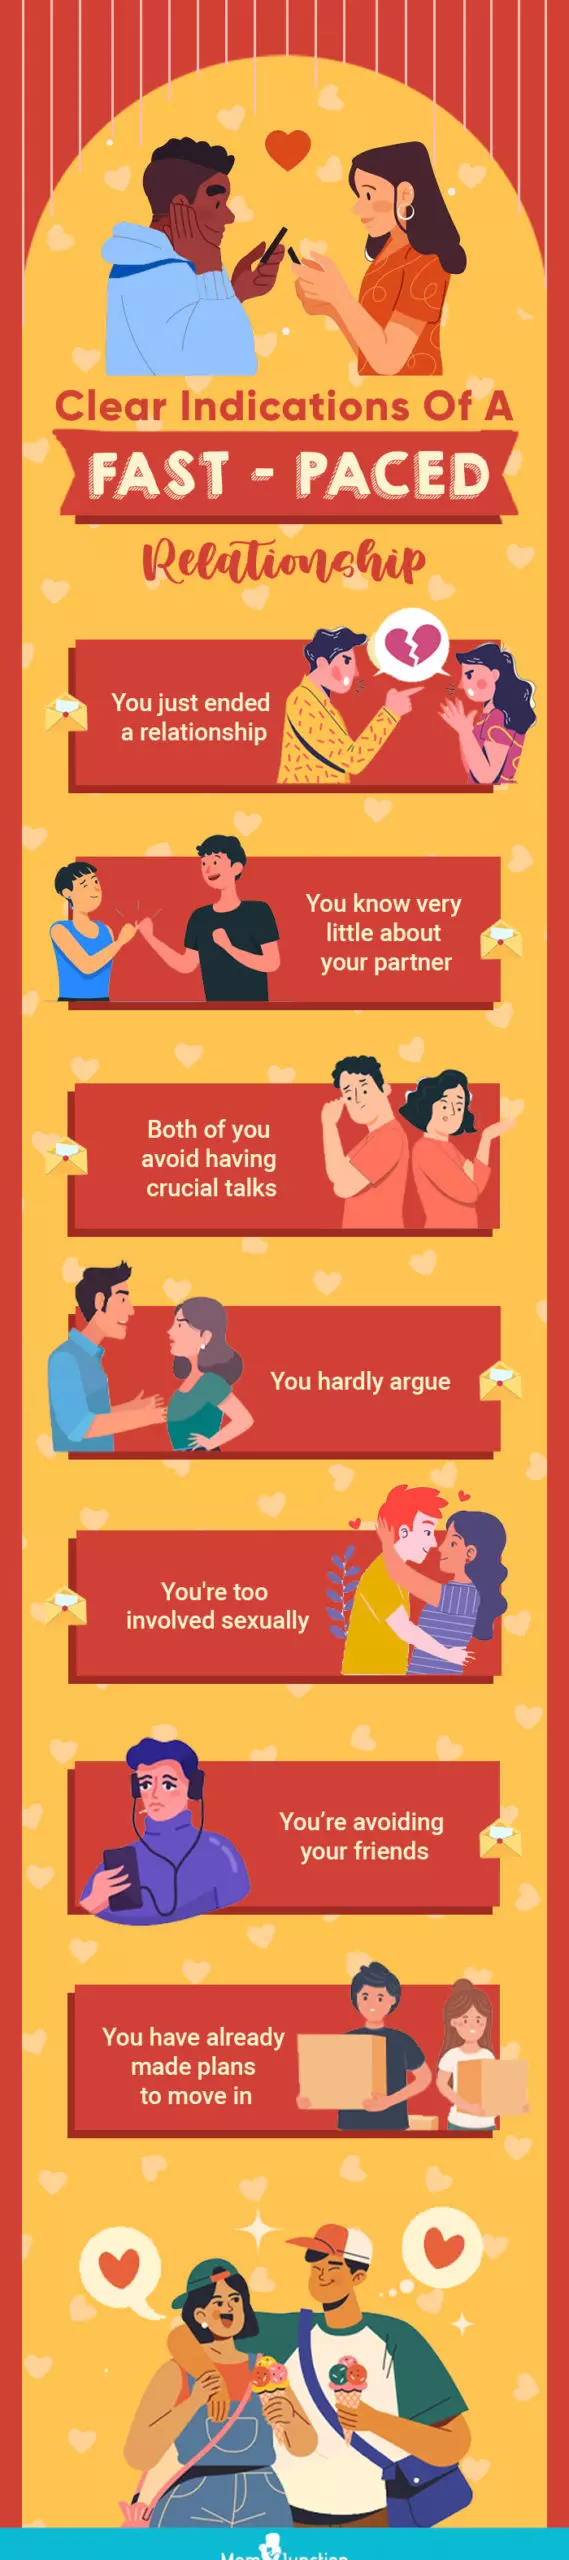 clear indications of a fast paced relationship (infographic)